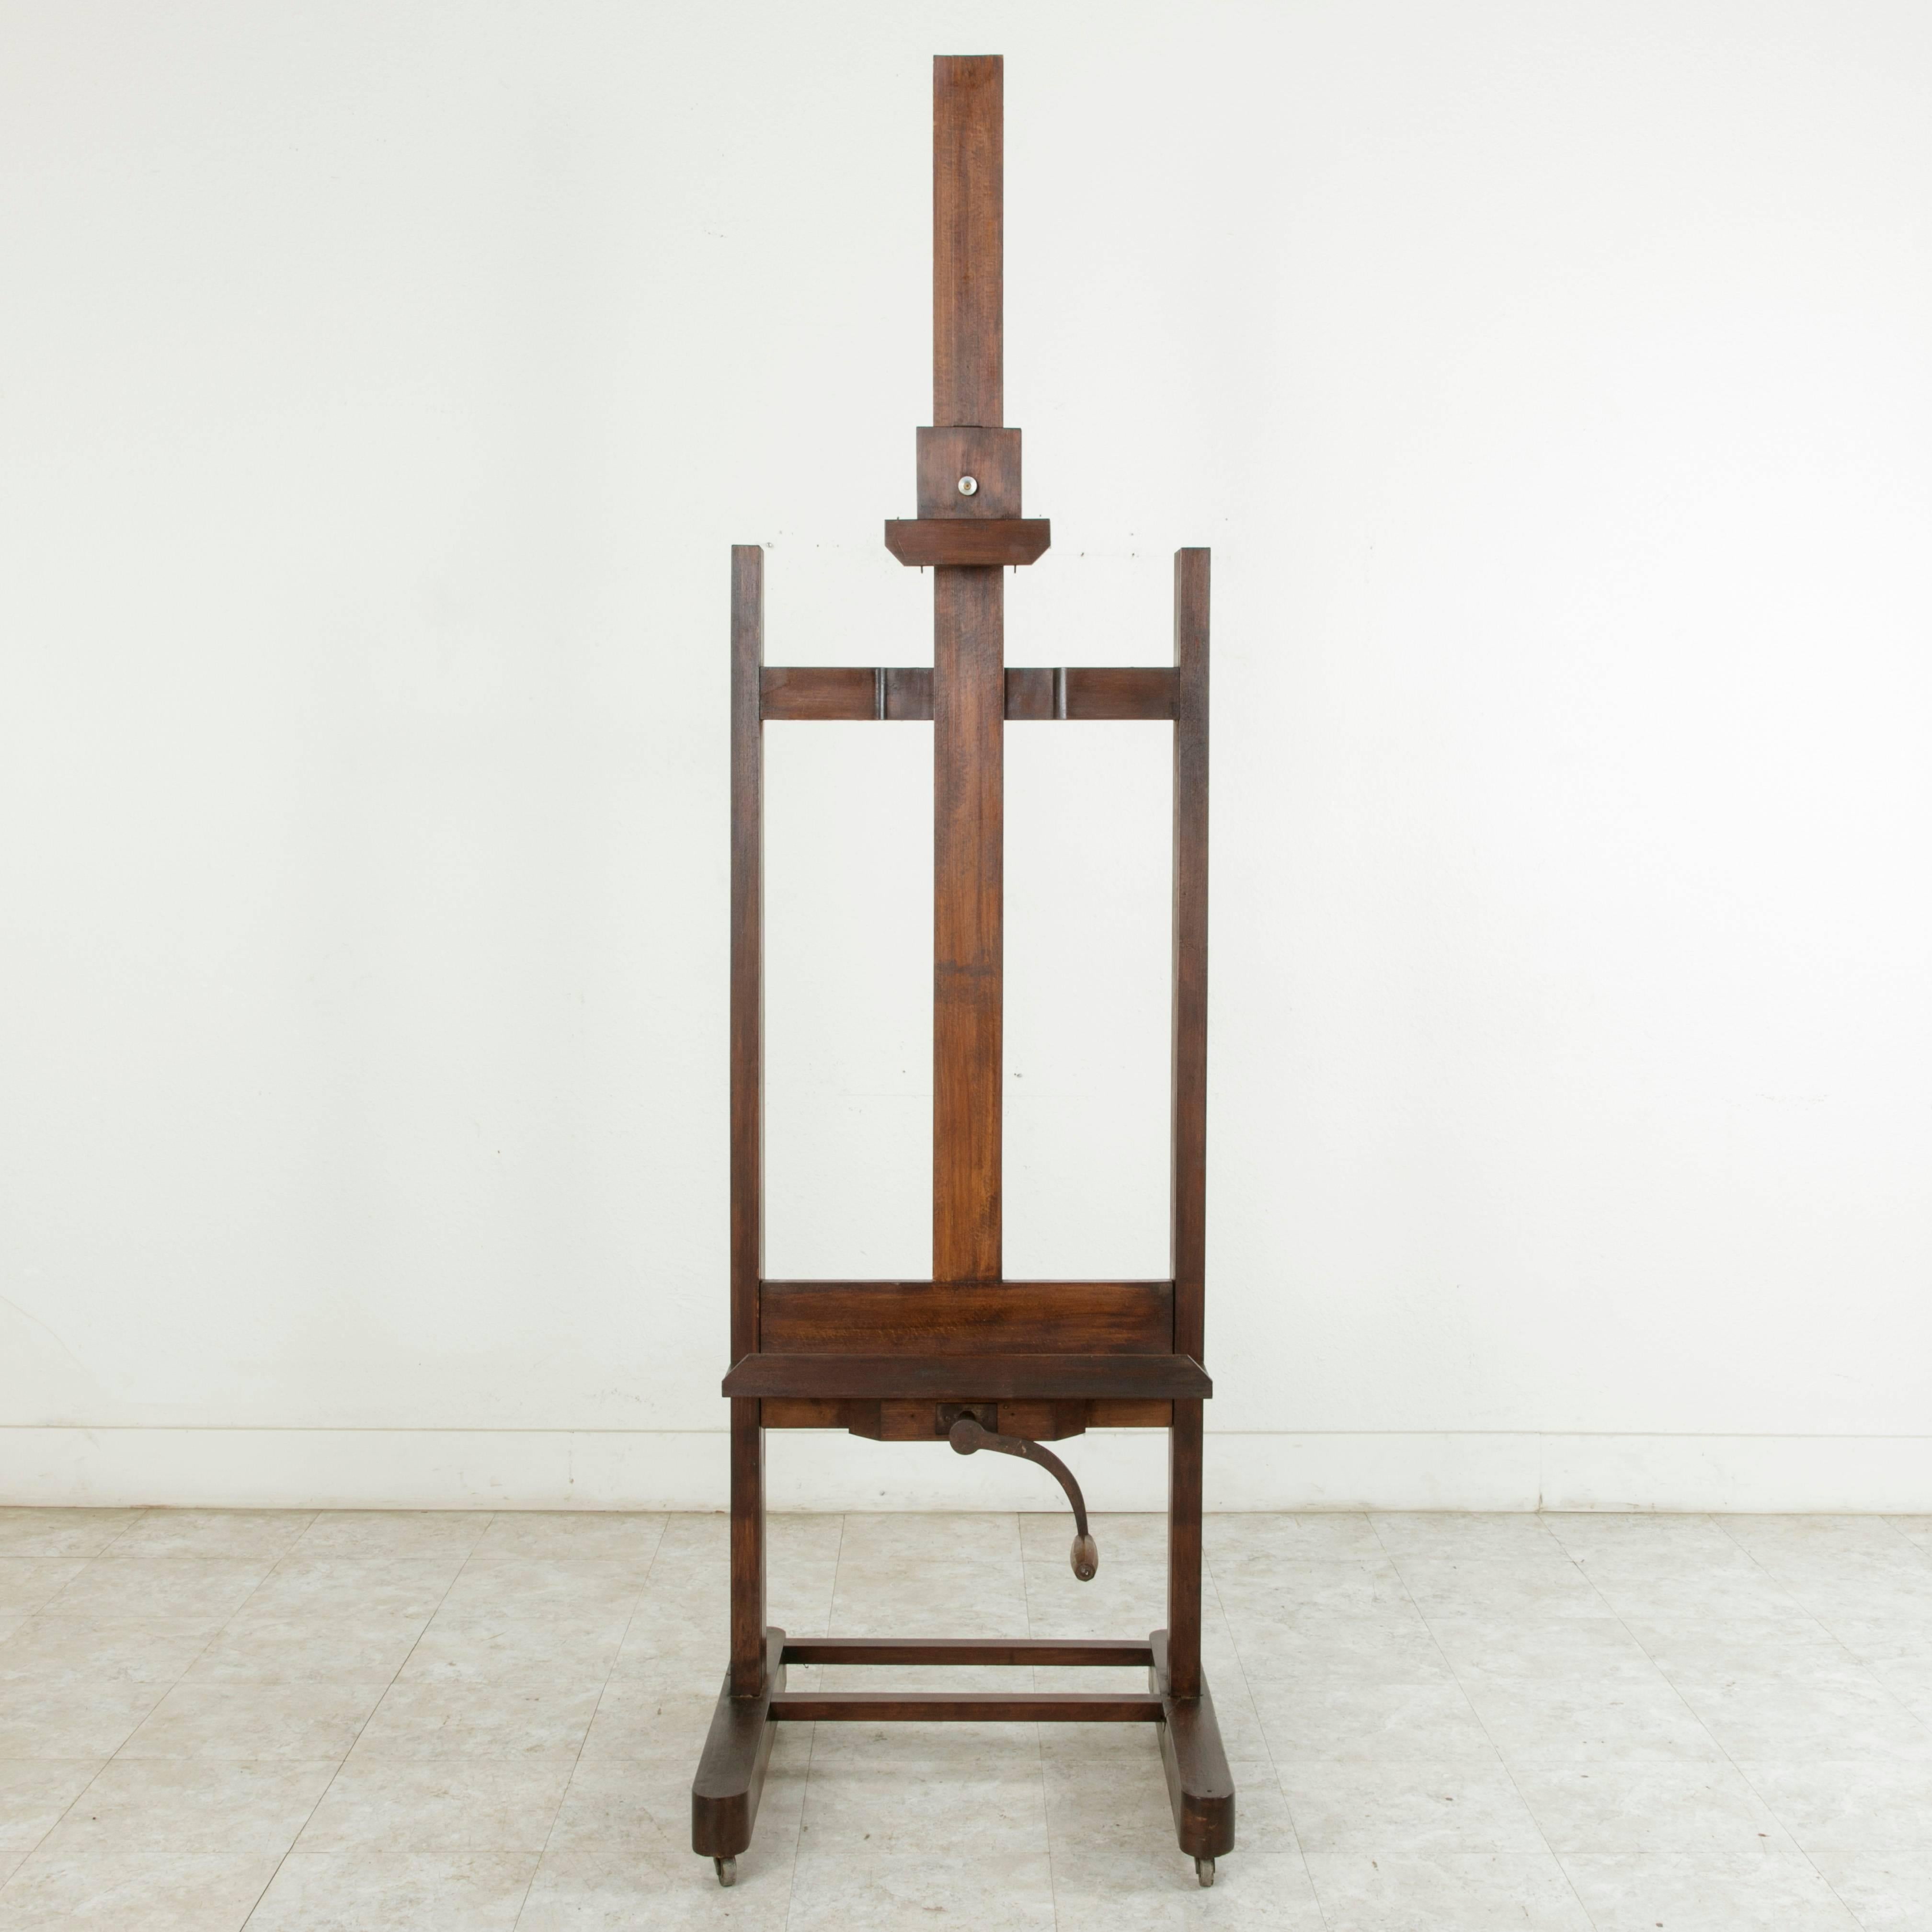 This large French oak floor easel from the turn of the 20th century features its original functioning iron crank and mechanism allowing for an adjustable height of 79 to 115 inches. It's four and a half inch deep tray makes it suitable for